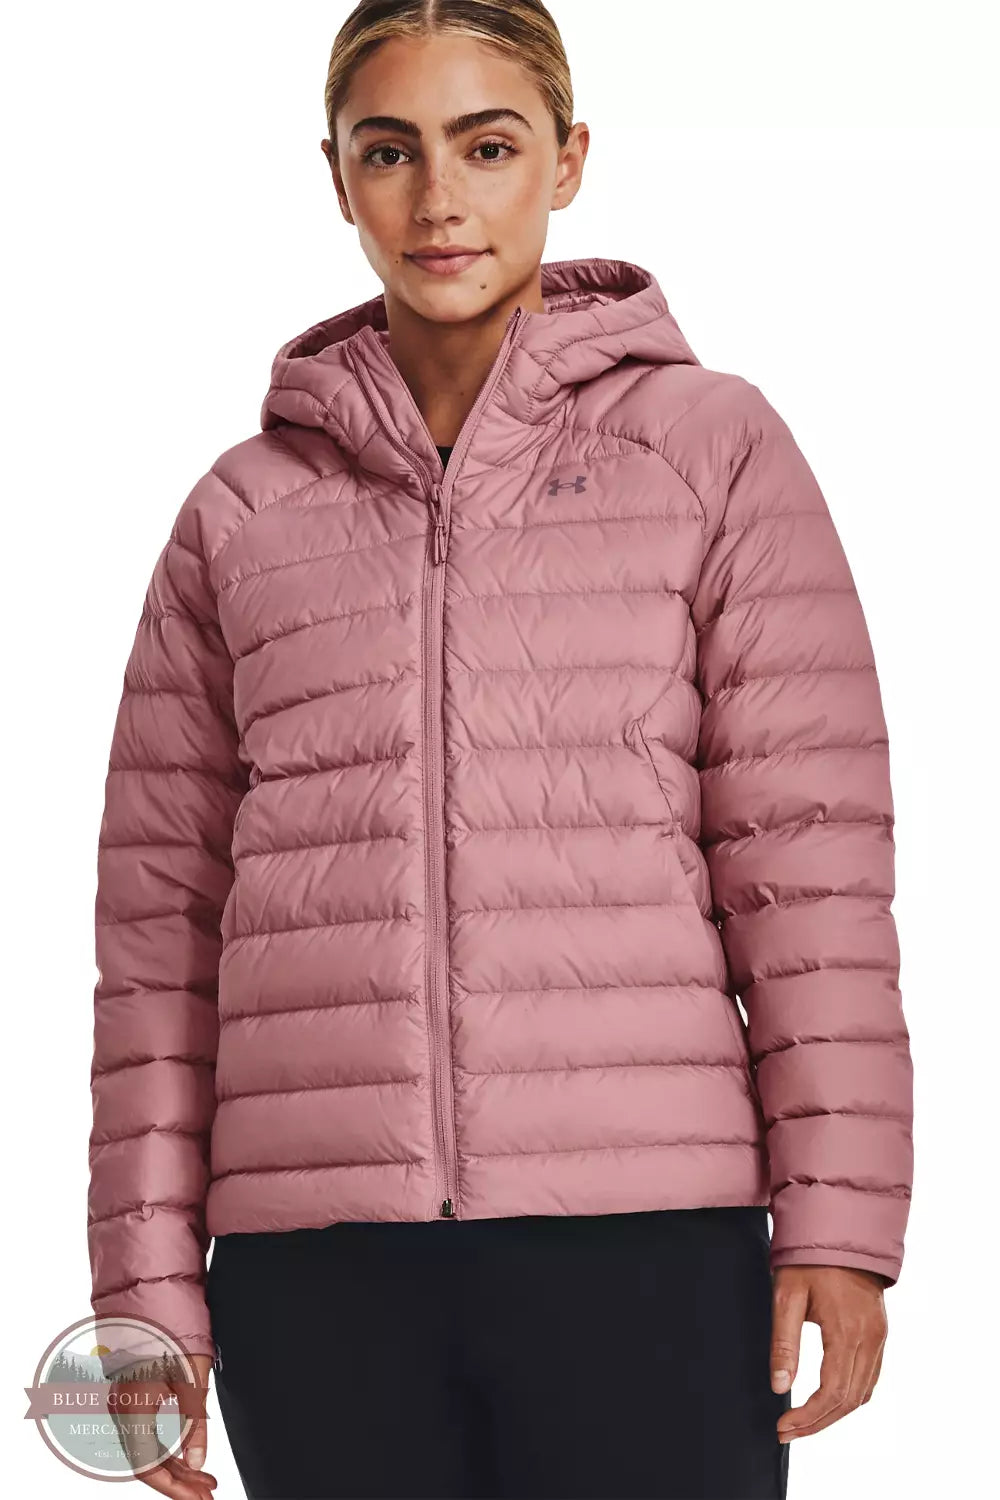 Under Armour 1372648 Storm Armour Down 2.0 Jacket Pink Elixir Front View